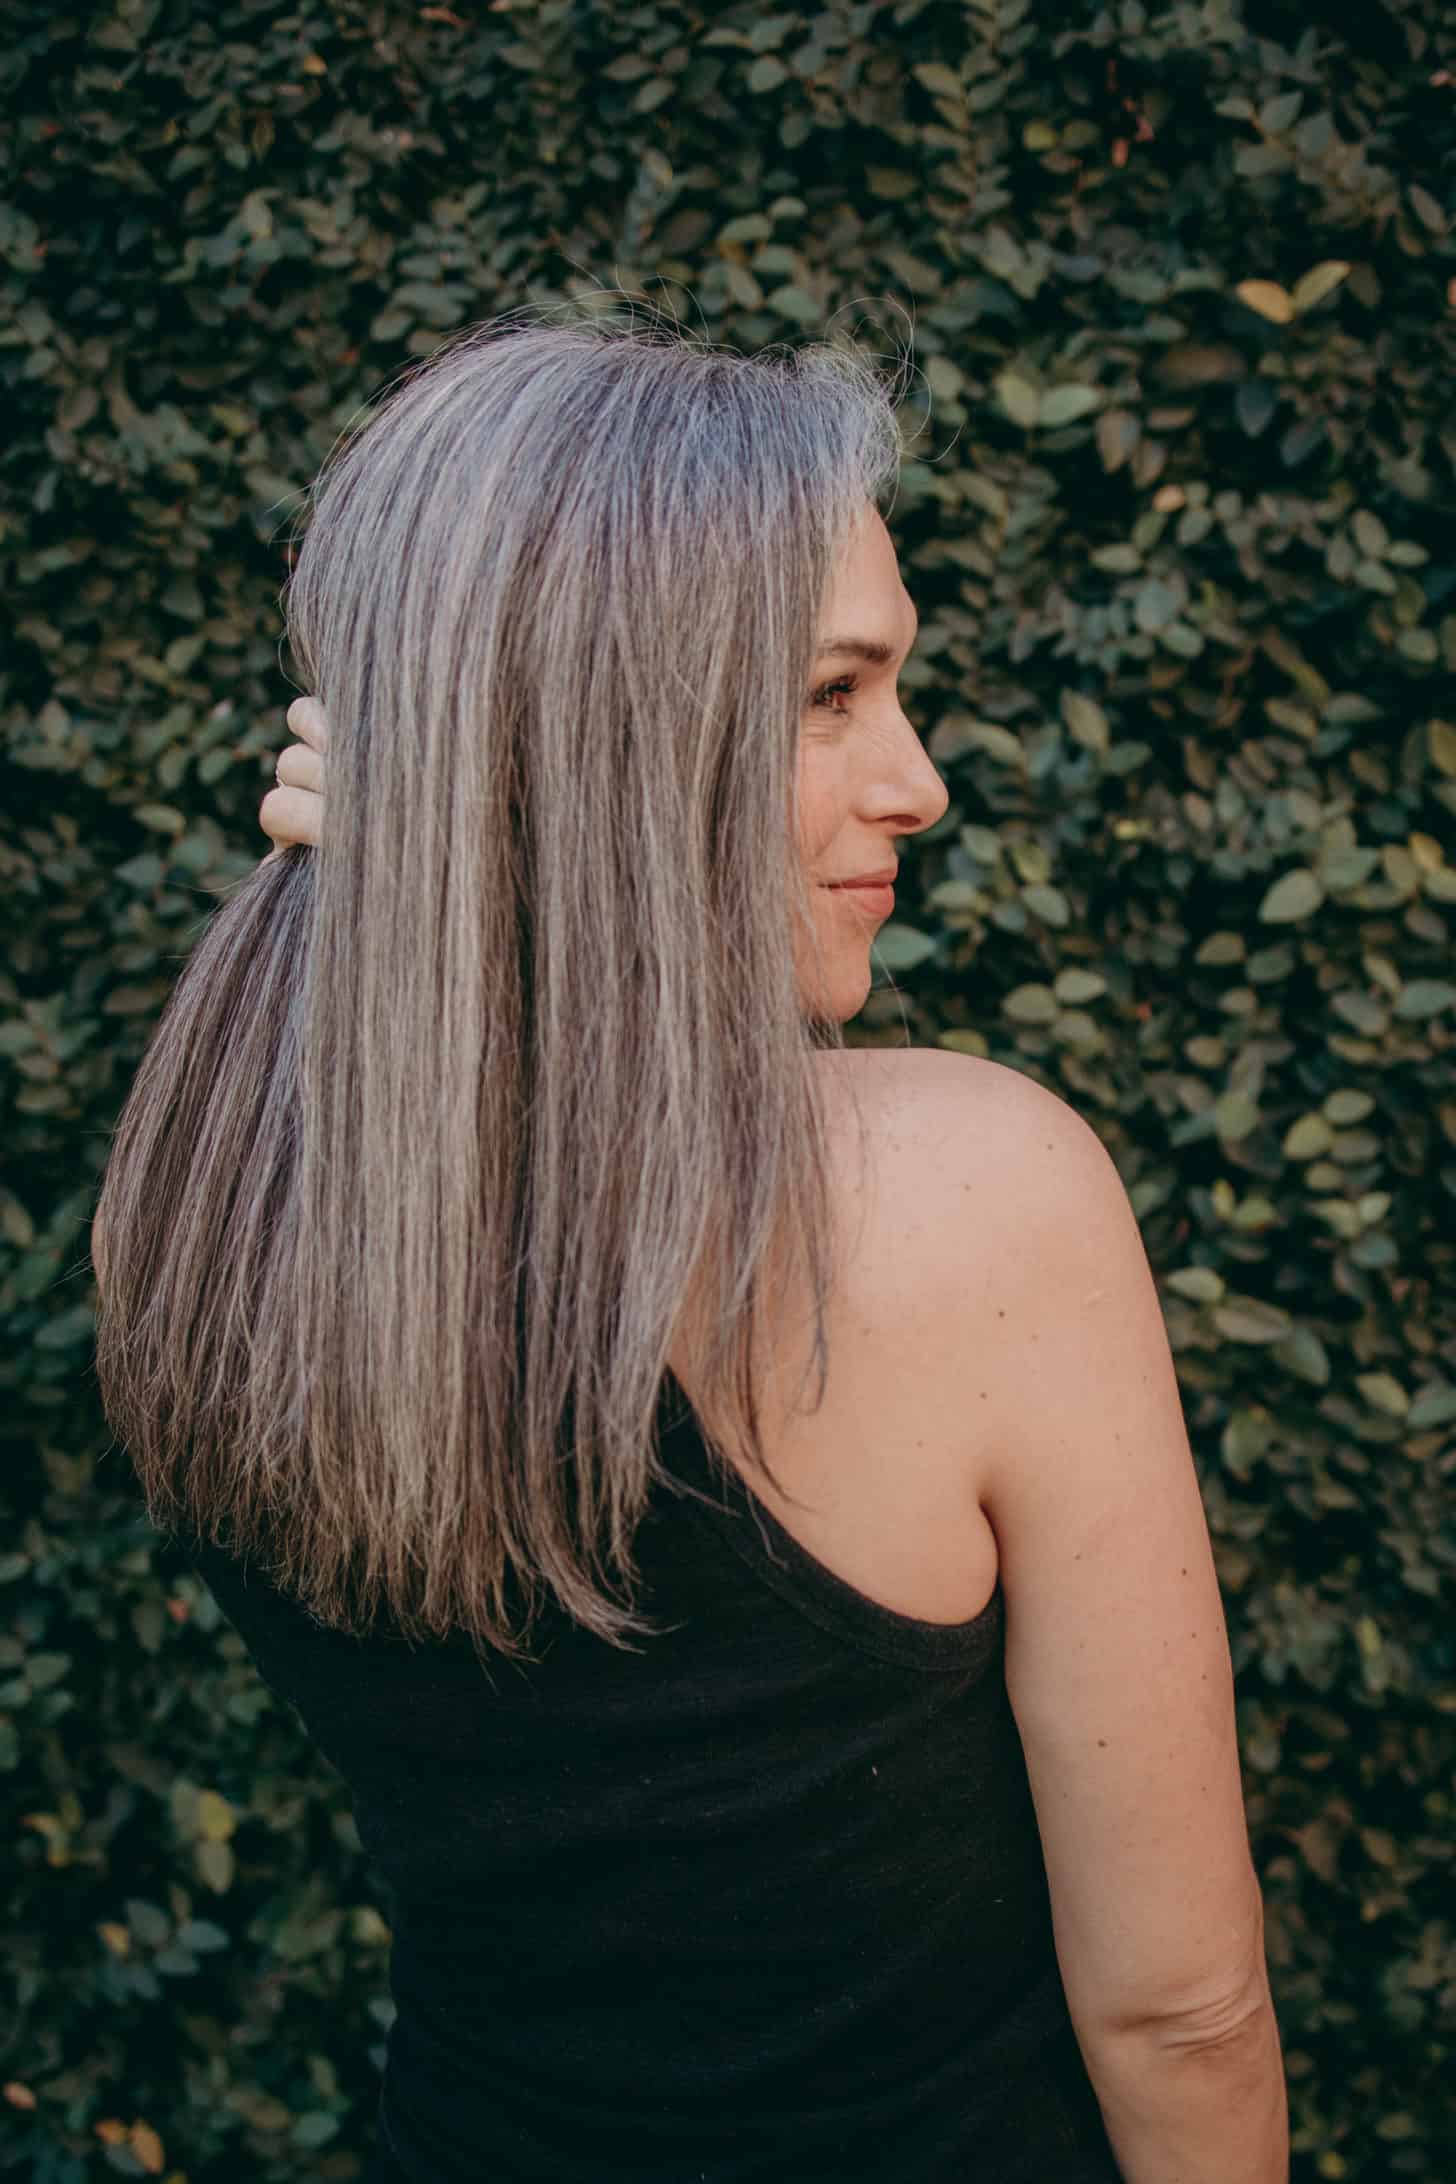 Lisa looking off the side with sleek gray hair.